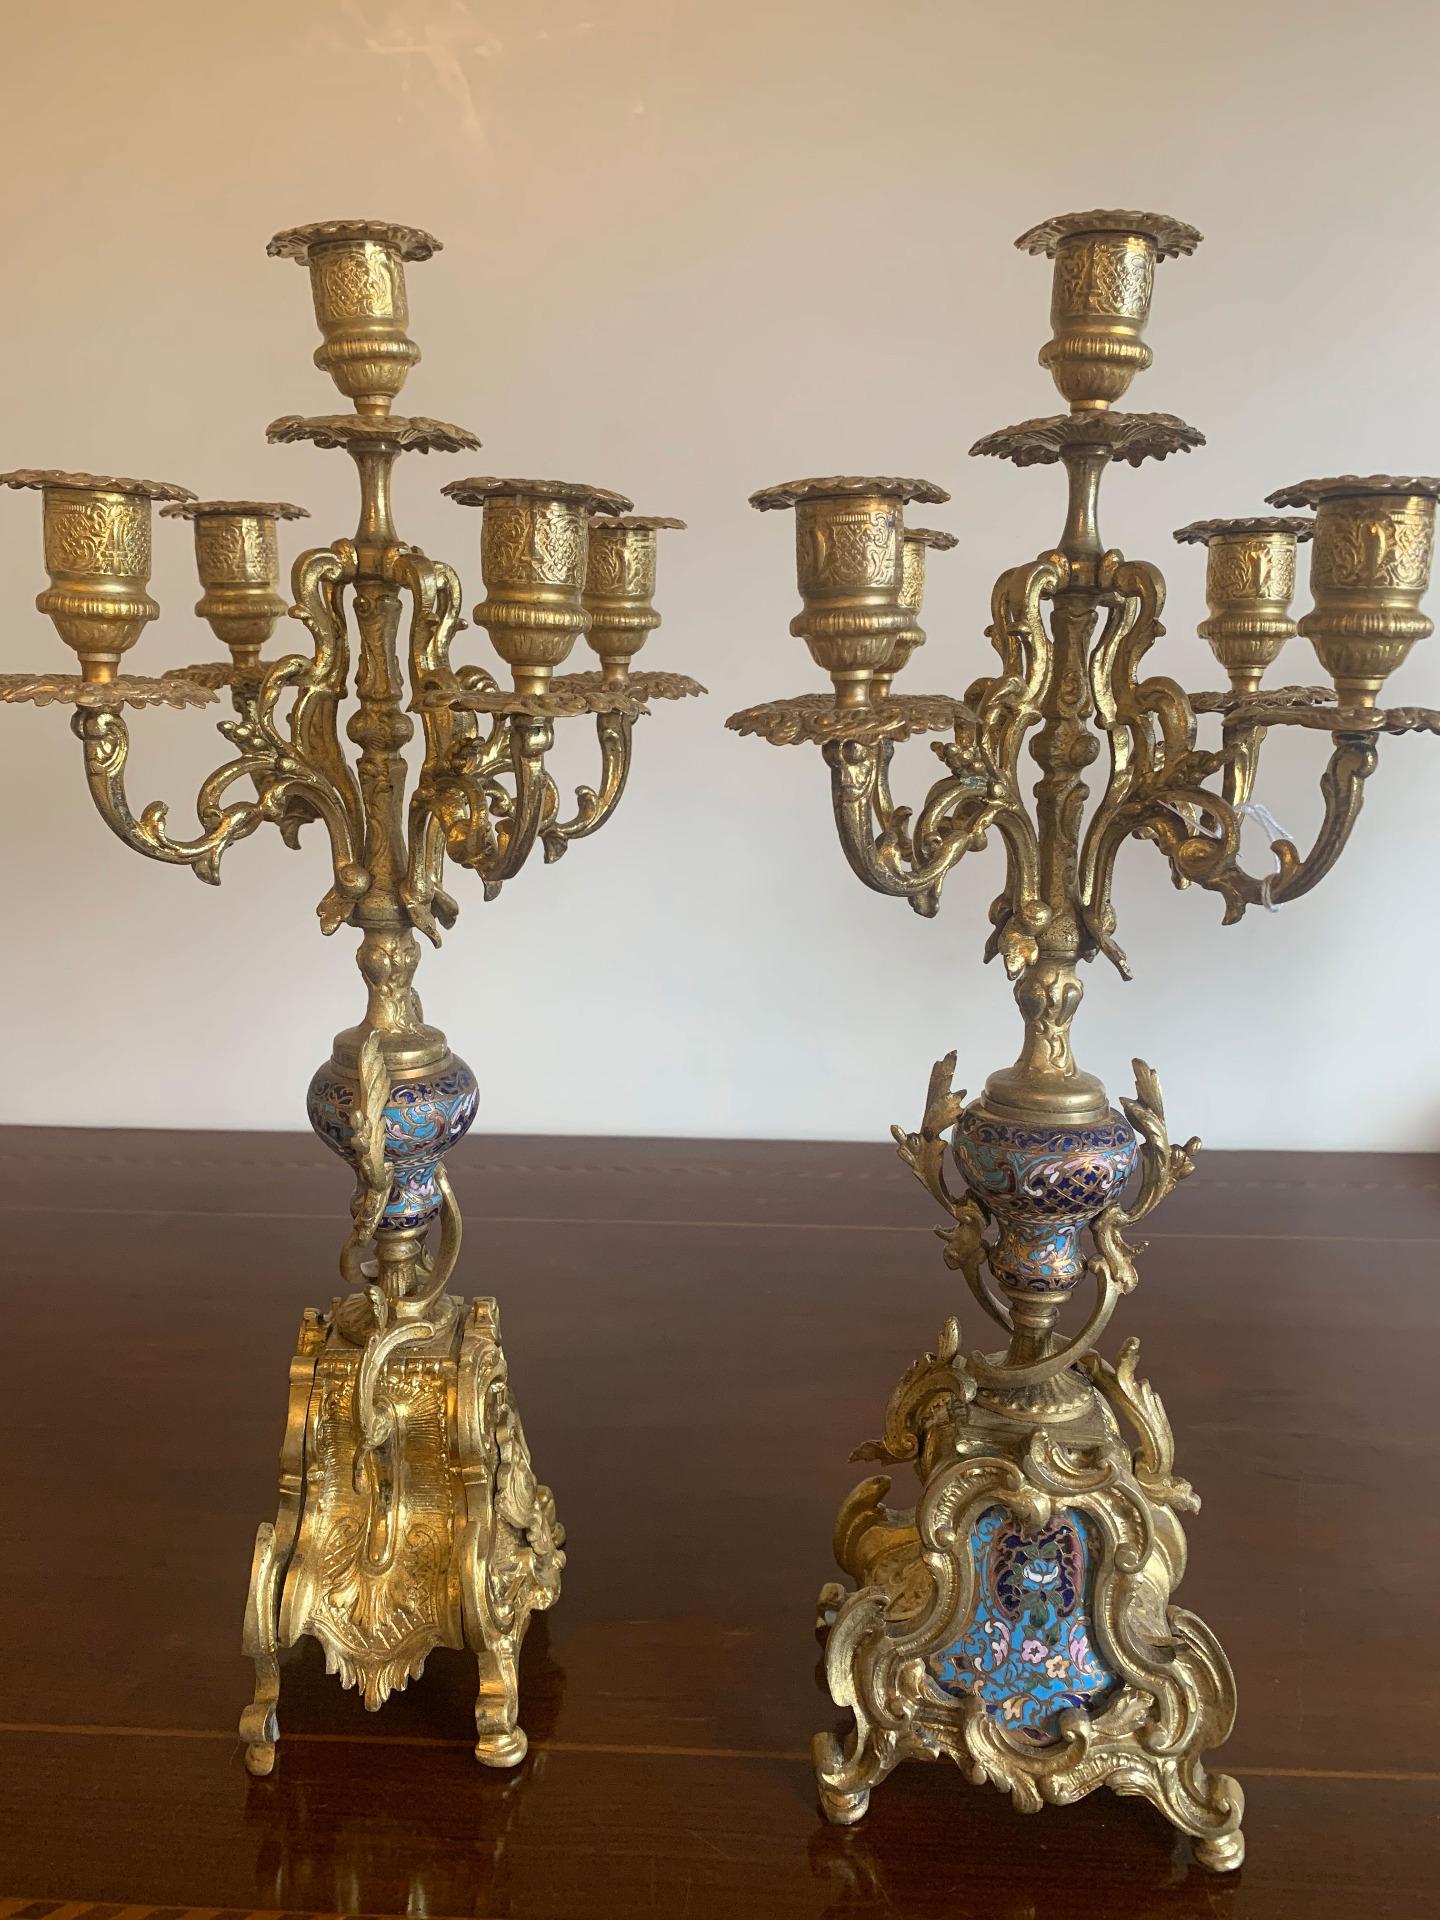 Gilt 19th Century Pair of Candlesticks With Glassonné Inserts For Sale